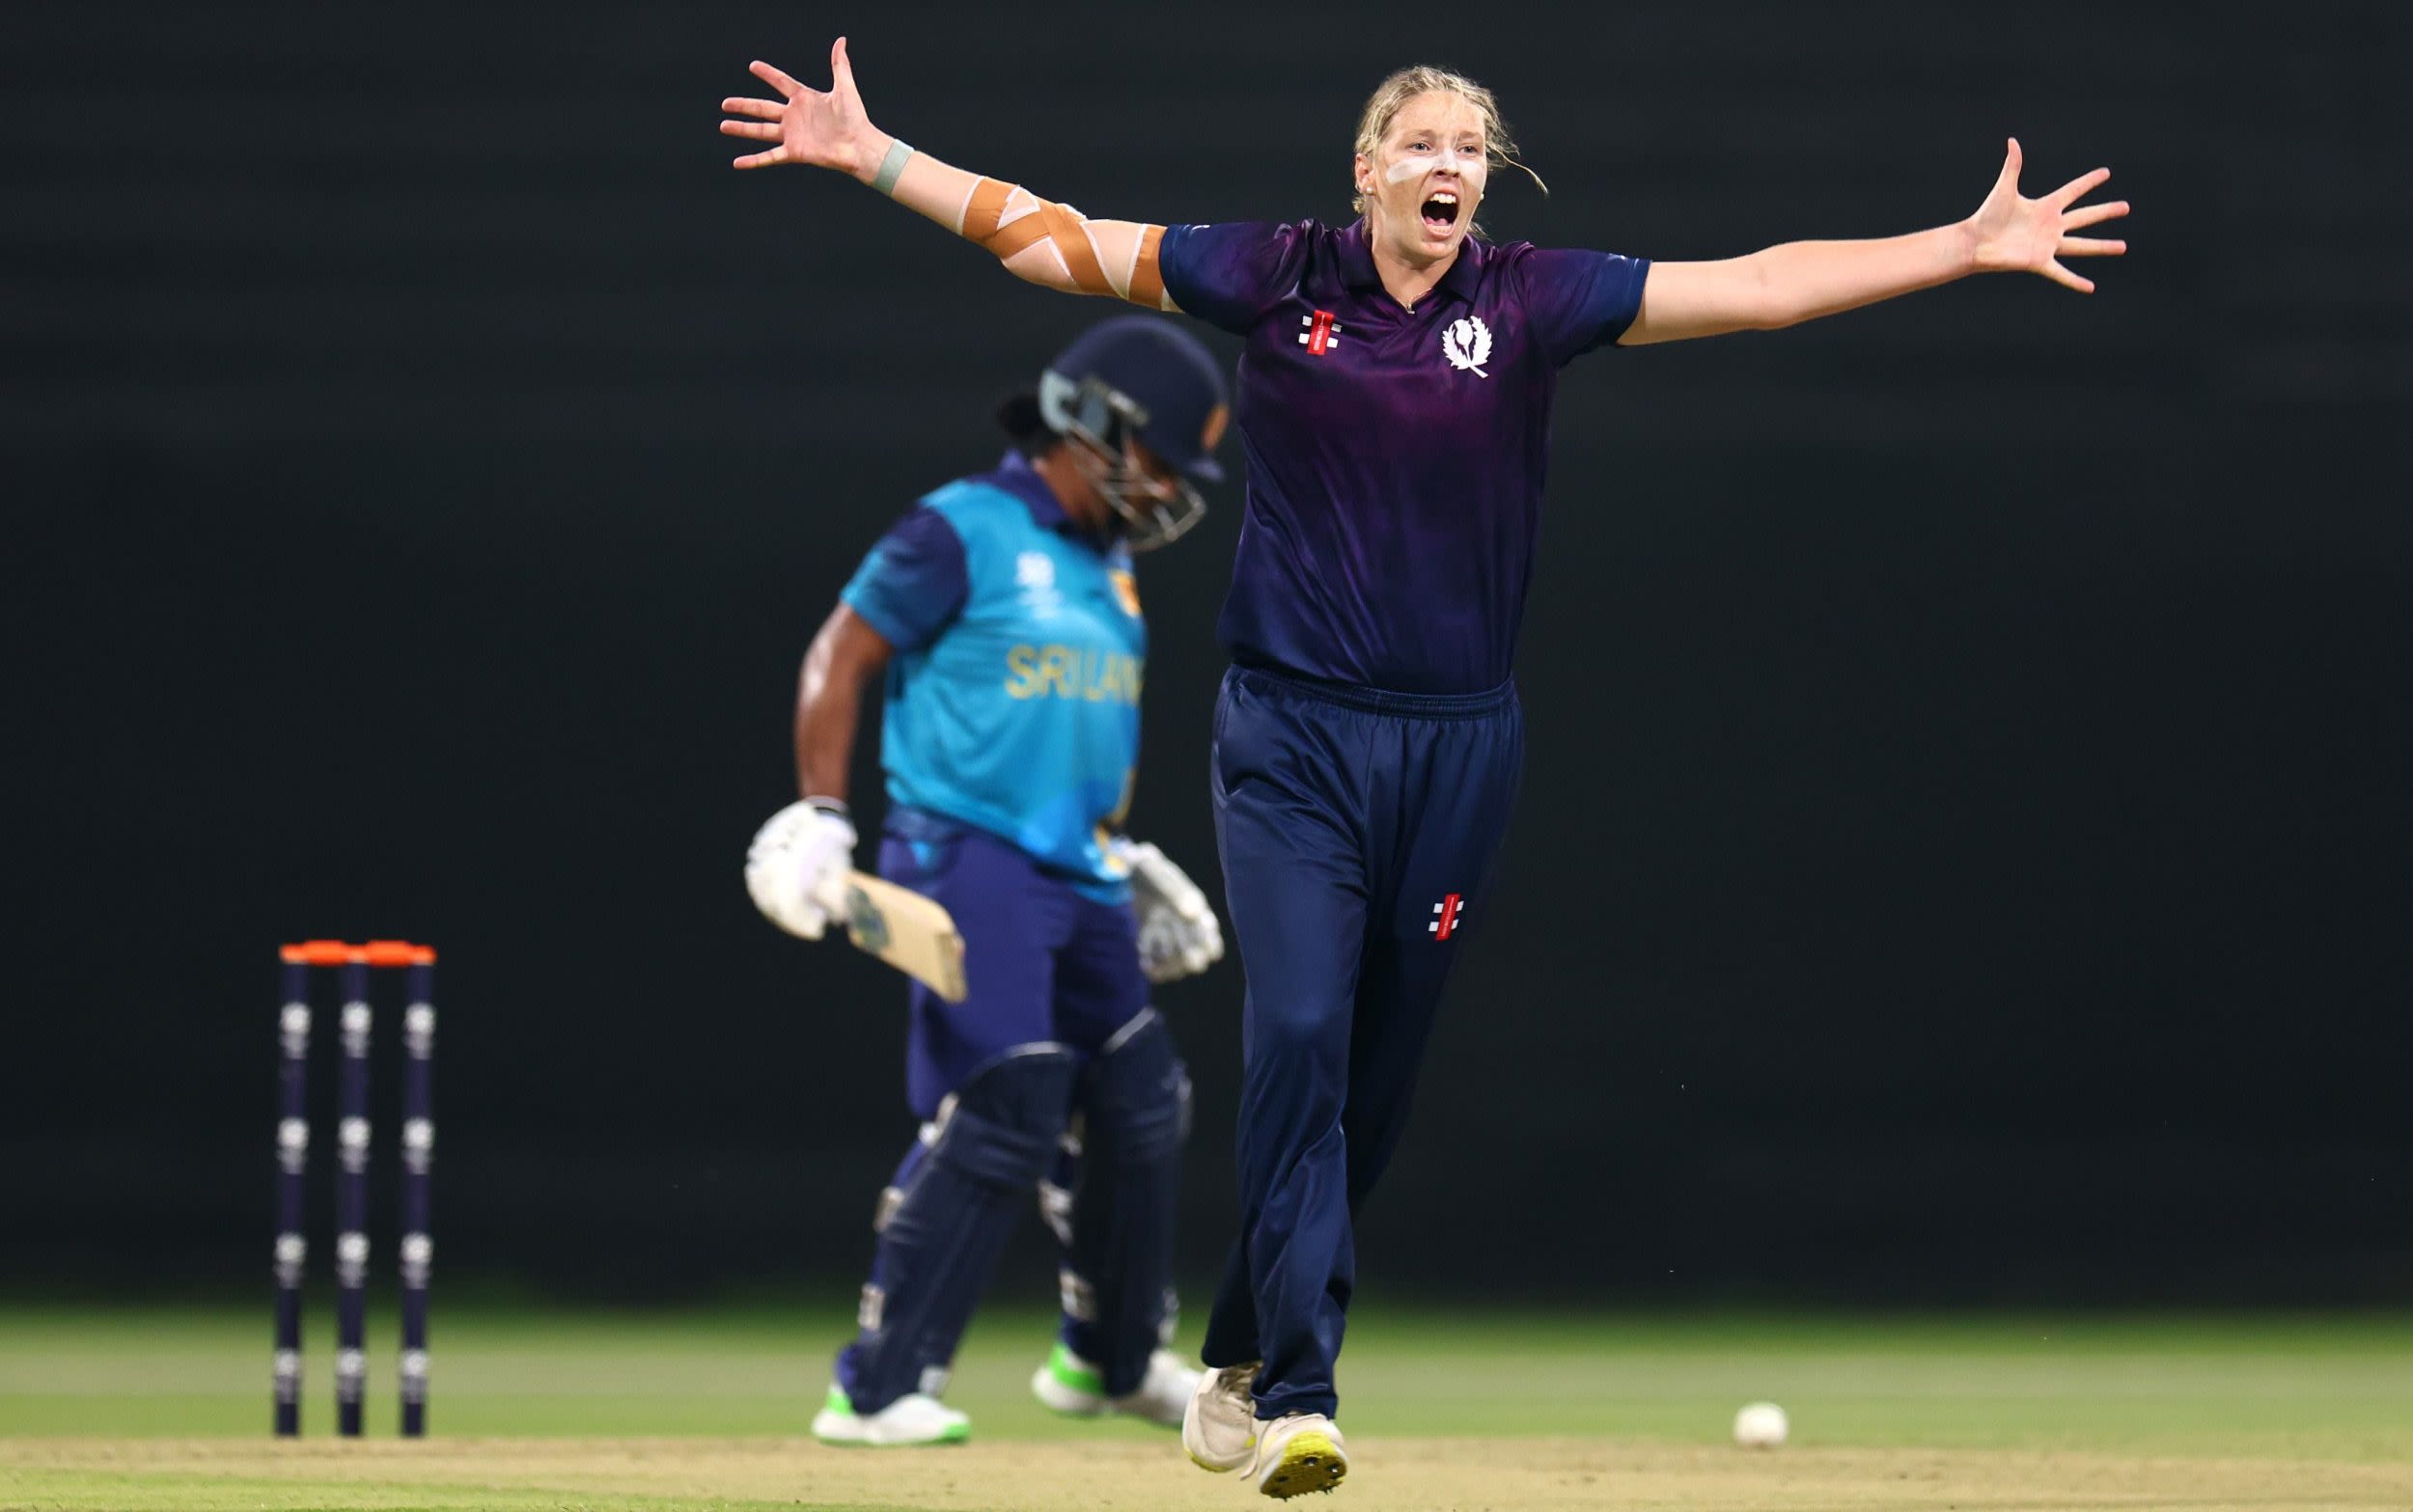 Chloe Abel: The nursing student from Tasmania who helped Scotland qualify for first T20 World Cup